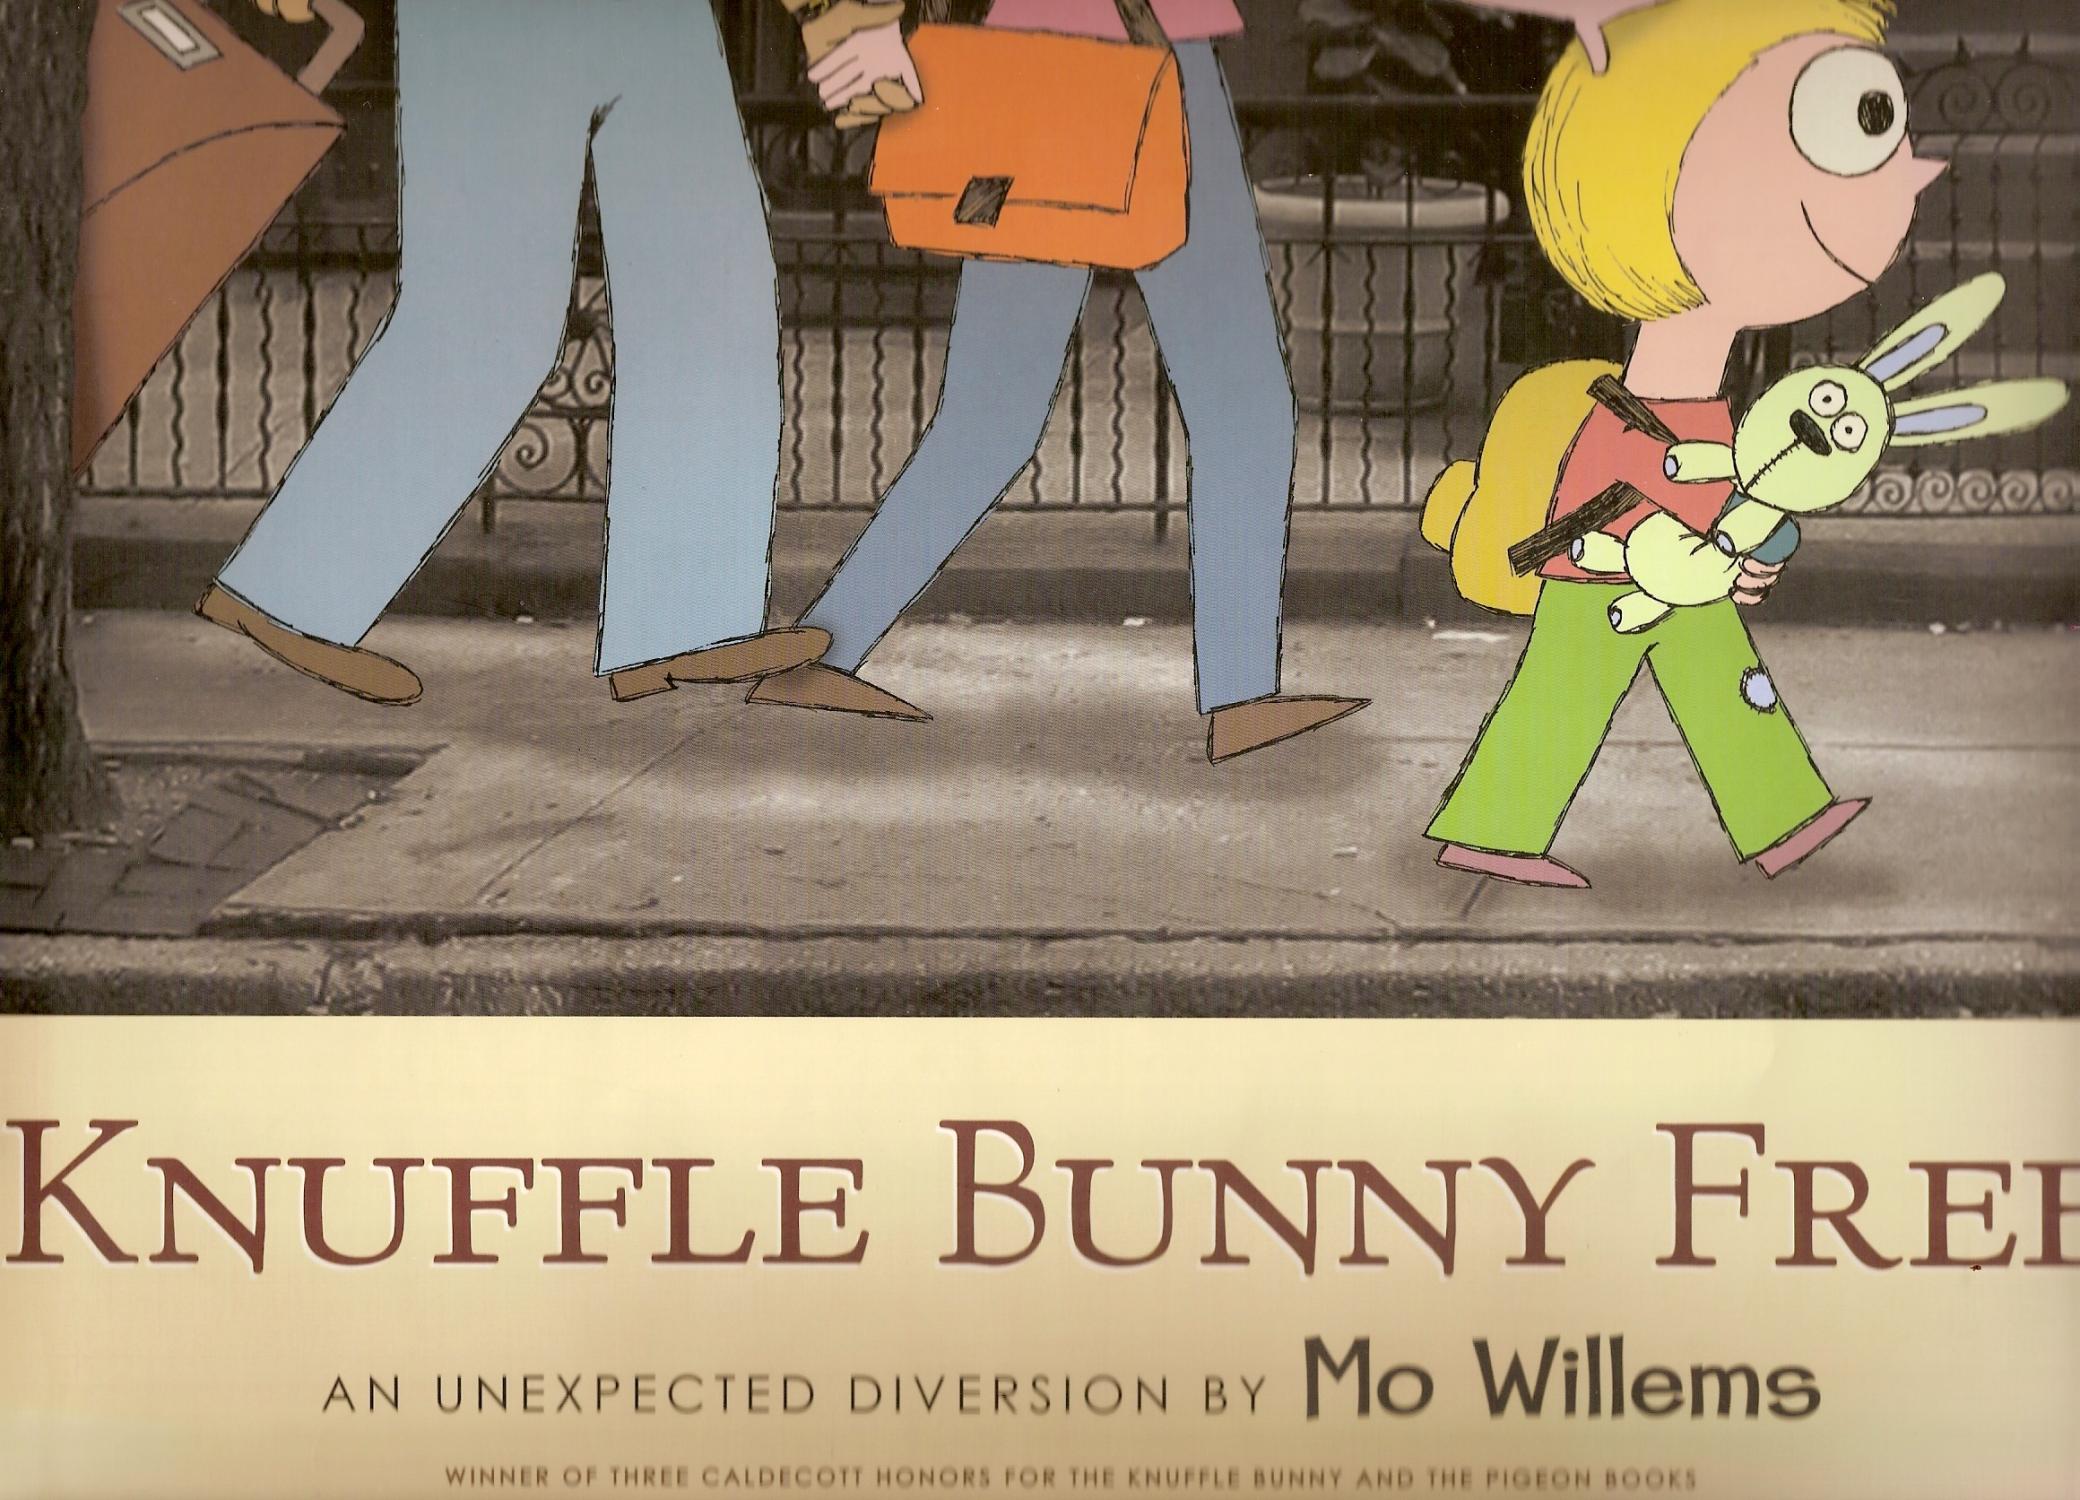 Knuffle Bunny Free Un Unexpected Diversion Knuffle Bunny Series By Willems Mo Very Good 